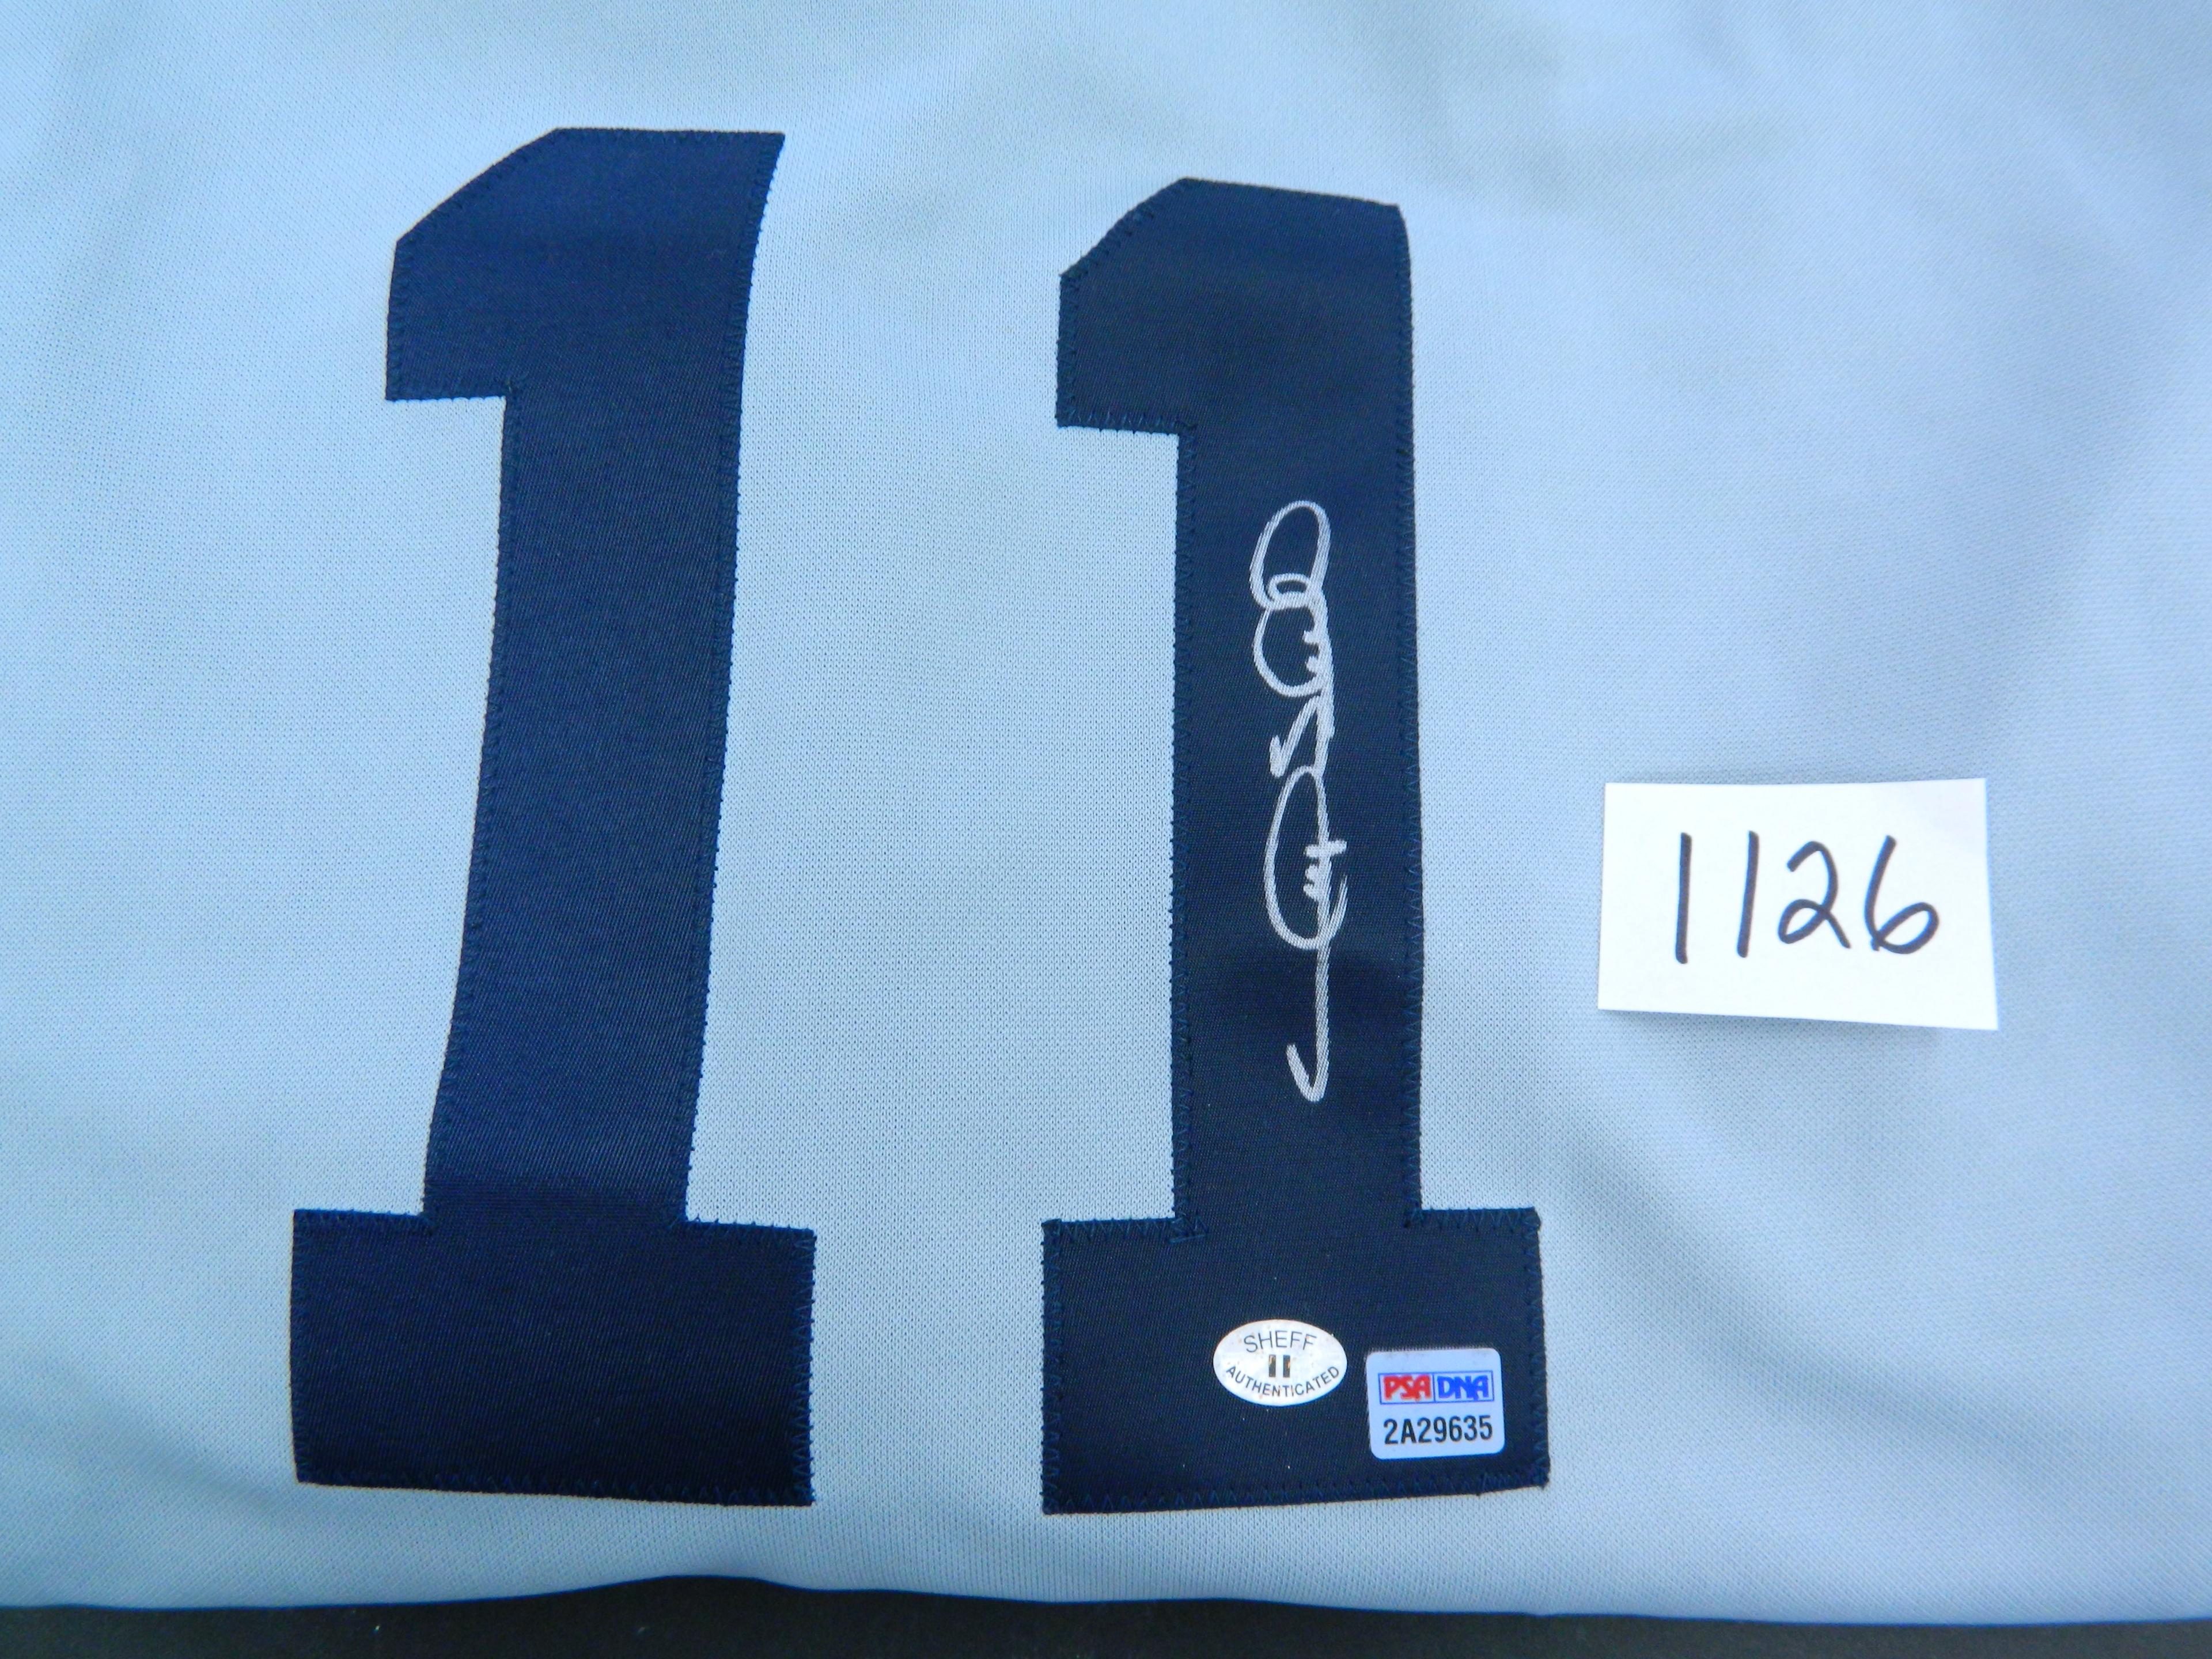 Gary Sheffield Signed Yankees Jersey, PSA Authenticated #2A29635